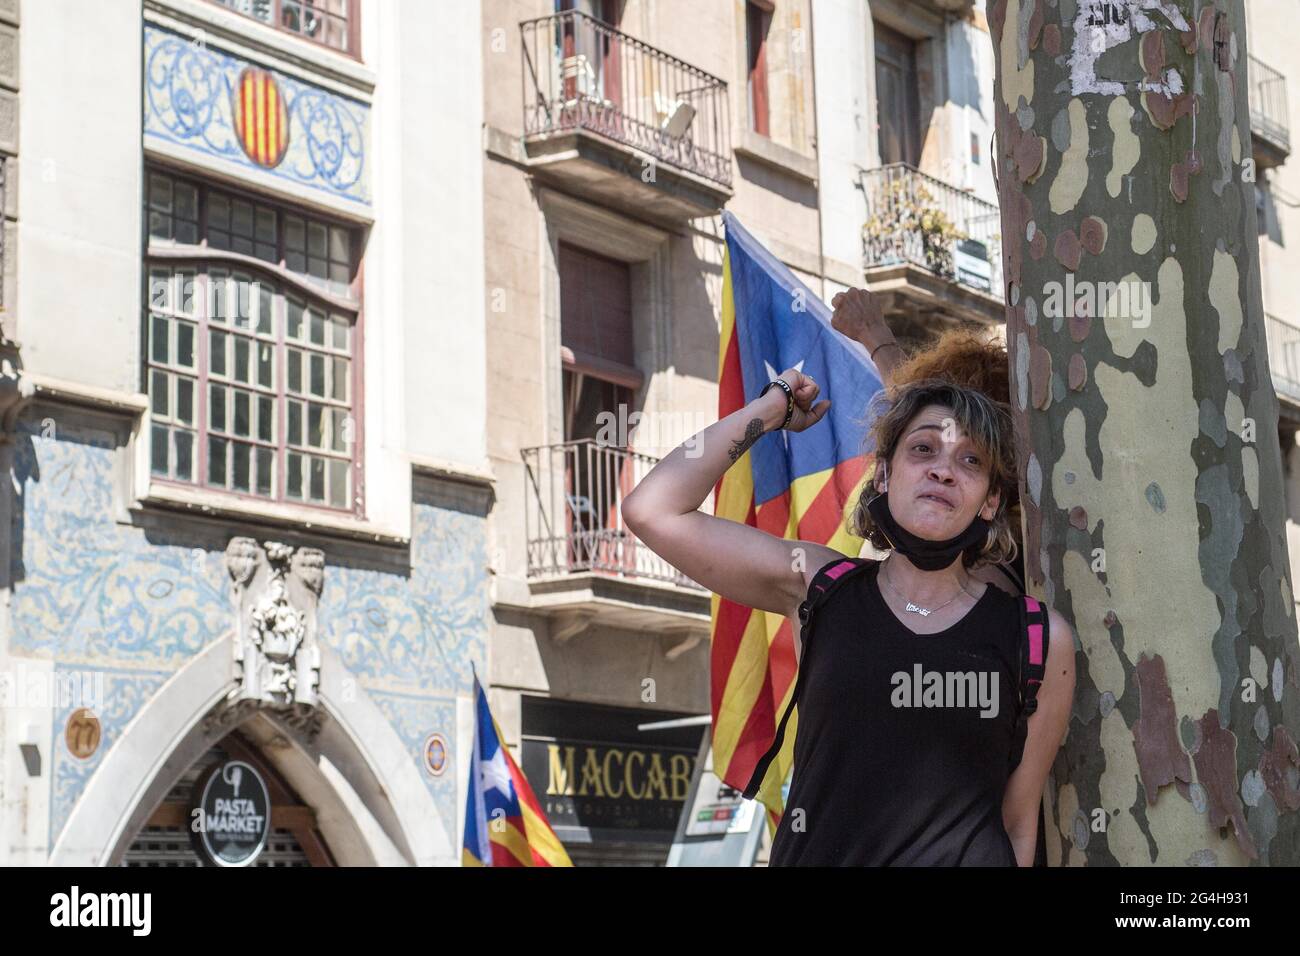 A protester chants slogans in front of Catalan independence flag during the demonstration.Hundreds of Catalan independentistas have demonstrated in Las Ramblas in Barcelona, in front of the Gran Teatre del Liceu (Great Theater of the Lyceum), shielded by many policemen, to protest the visit of the President of the Spanish Government, Pedro Sanchez, who has held a conference entitled 'Reunion: a project for the future for all of Spain', with the expectation of an imminent granting of pardons for the independence leaders in prison. The protesters protested to denounce that the repression against Stock Photo